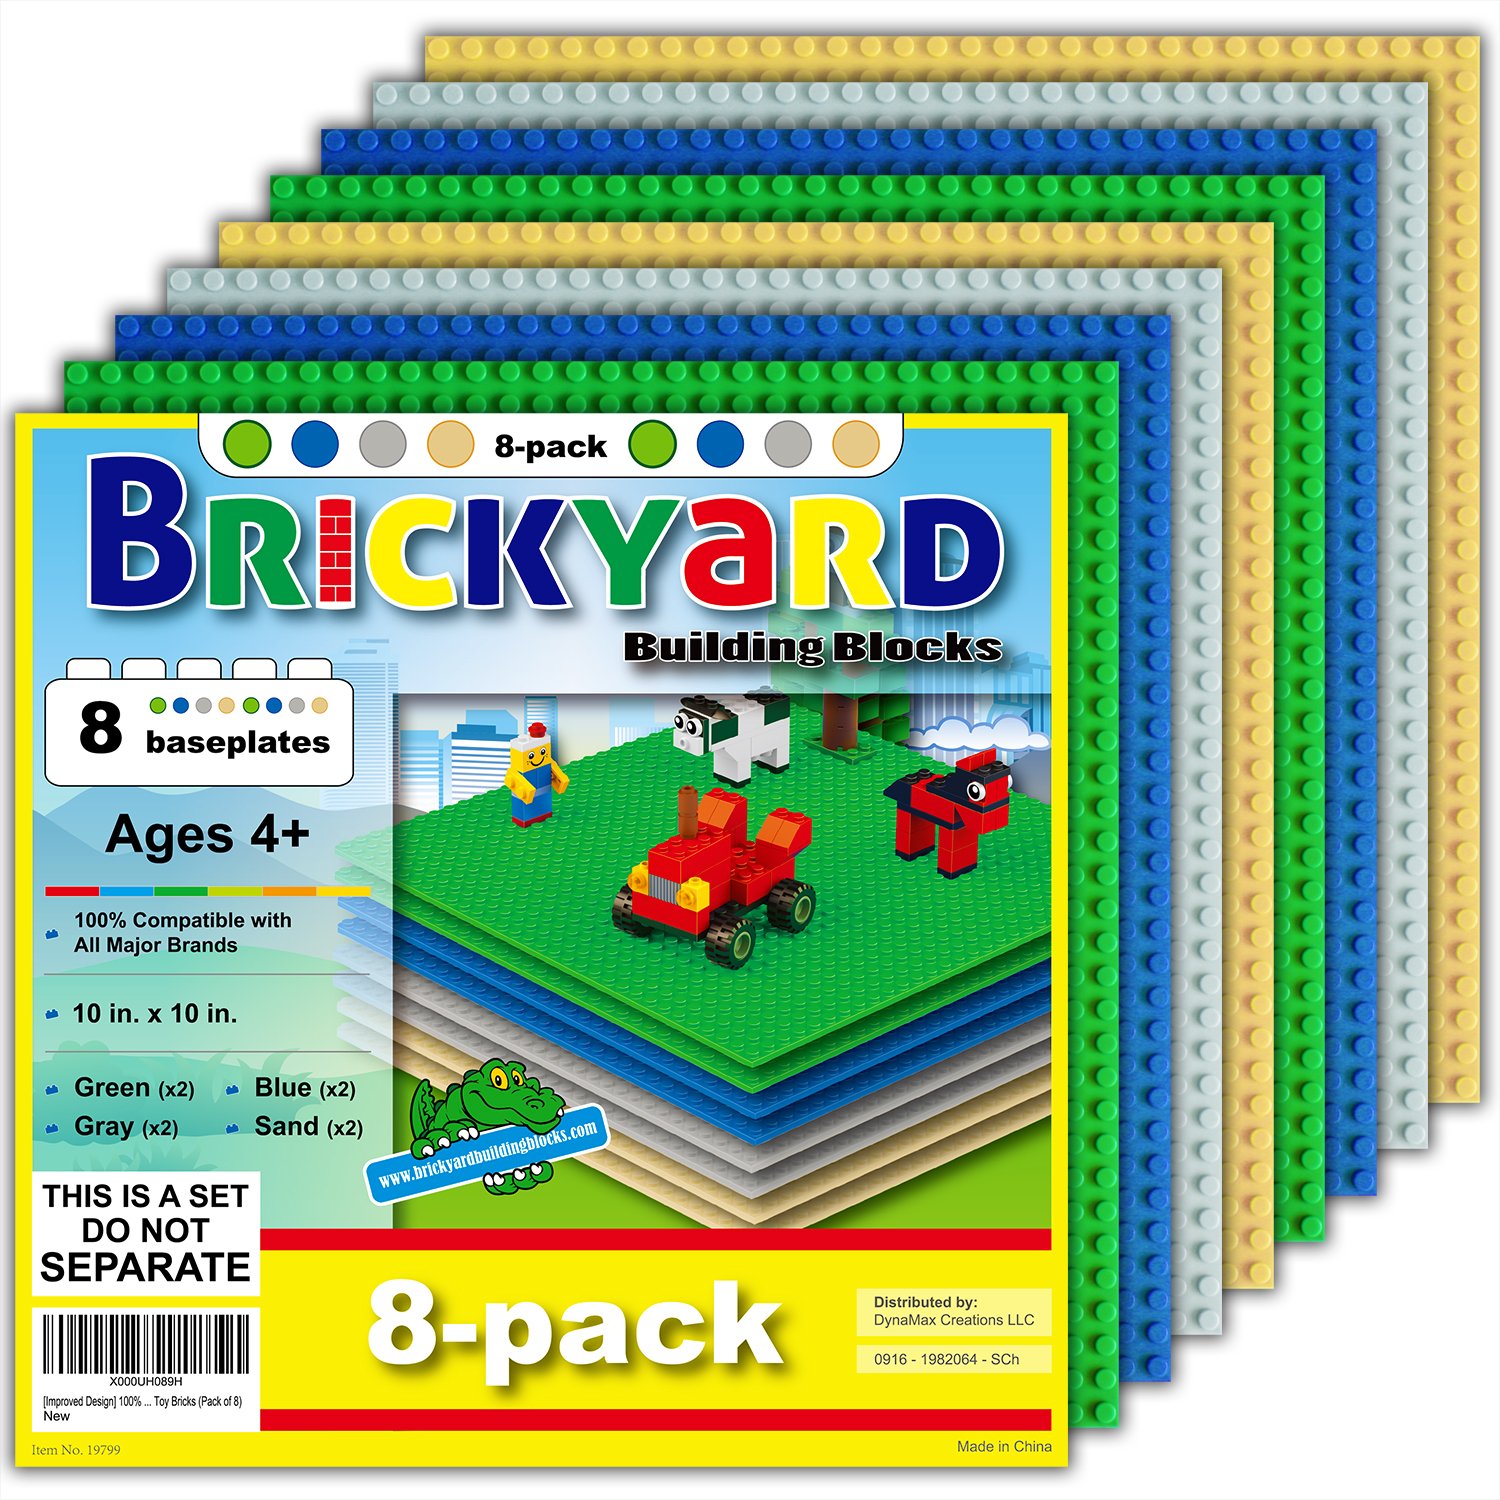 Book Cover Brickyard Building Blocks Lego Compatible Baseplate - Pack of 8 Large 10 x 10 Inch Base Plates for Toy Bricks, STEM Activities & Display Table - Green, Blue, Gray, Sand Assorted 8-pack